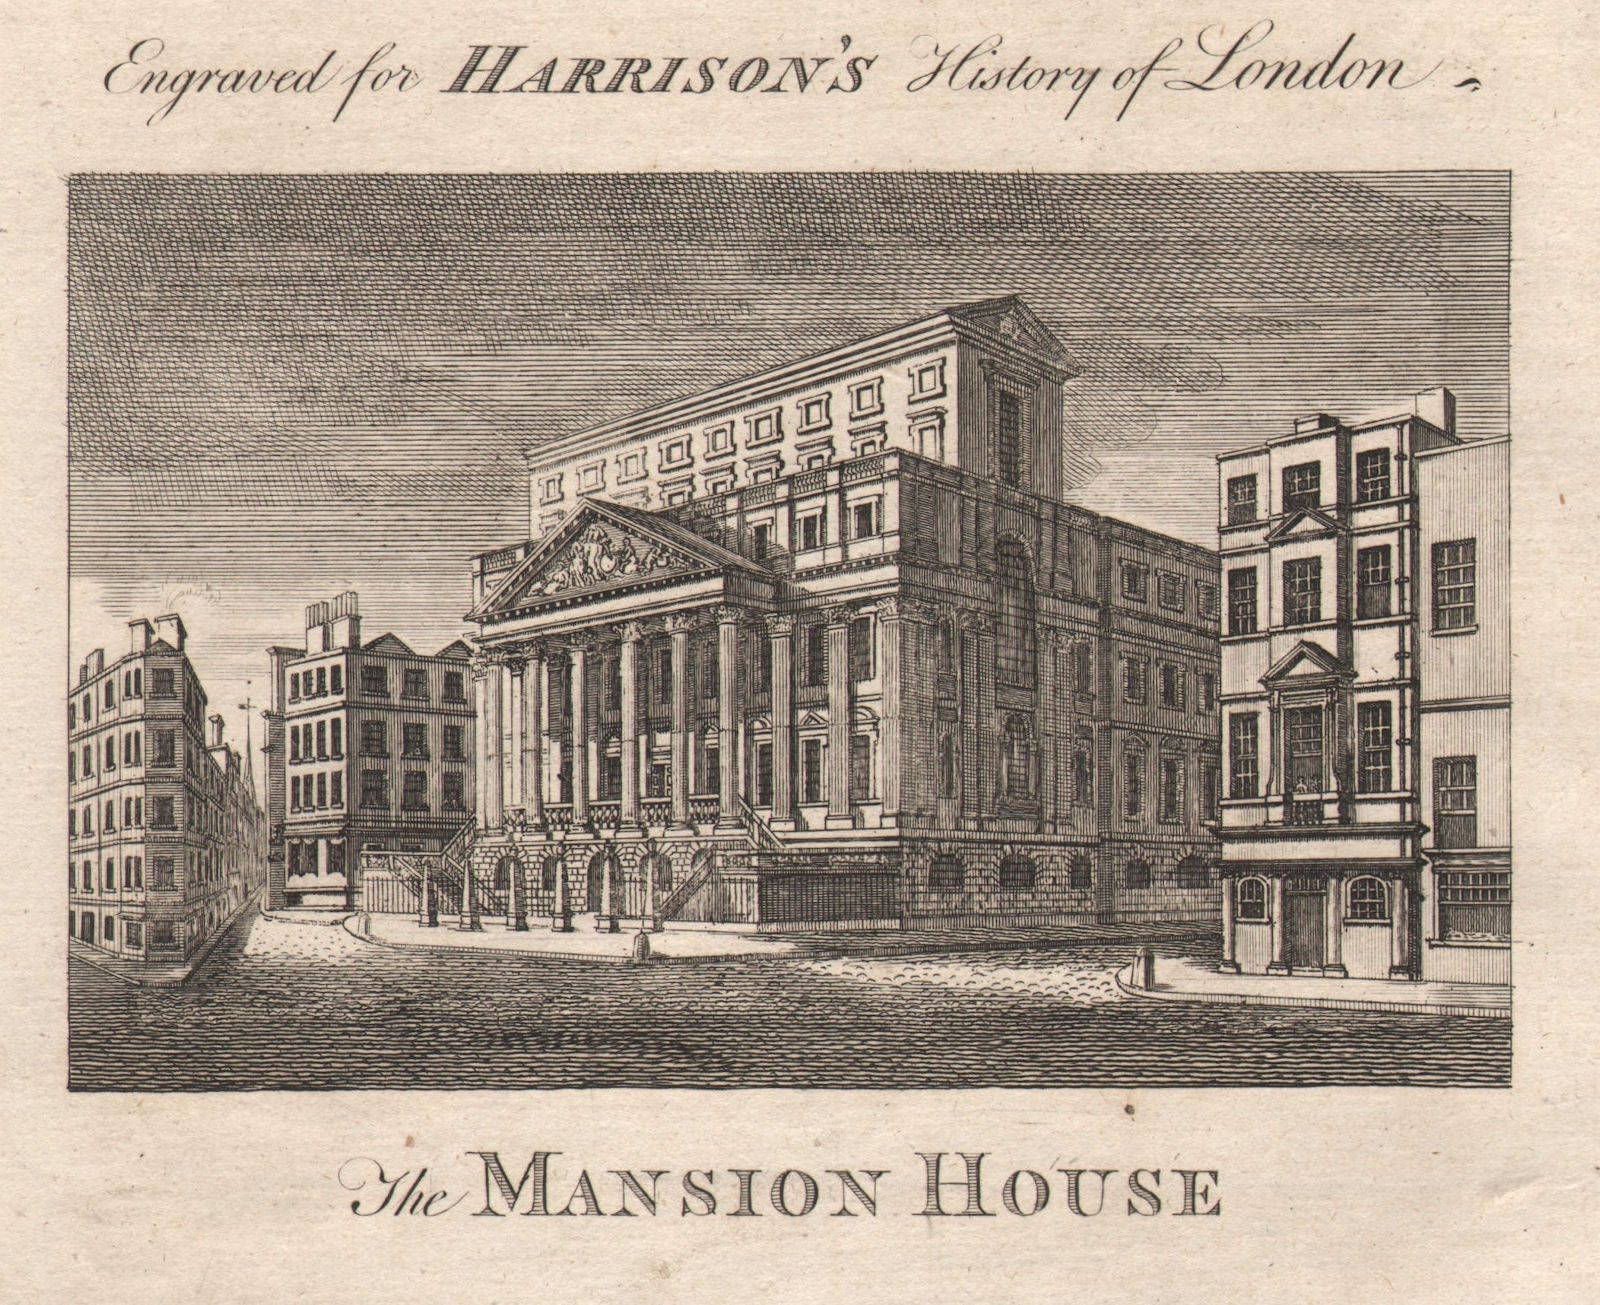 Associate Product "The Mansion House", City of London. HARRISON 1776 old antique print picture